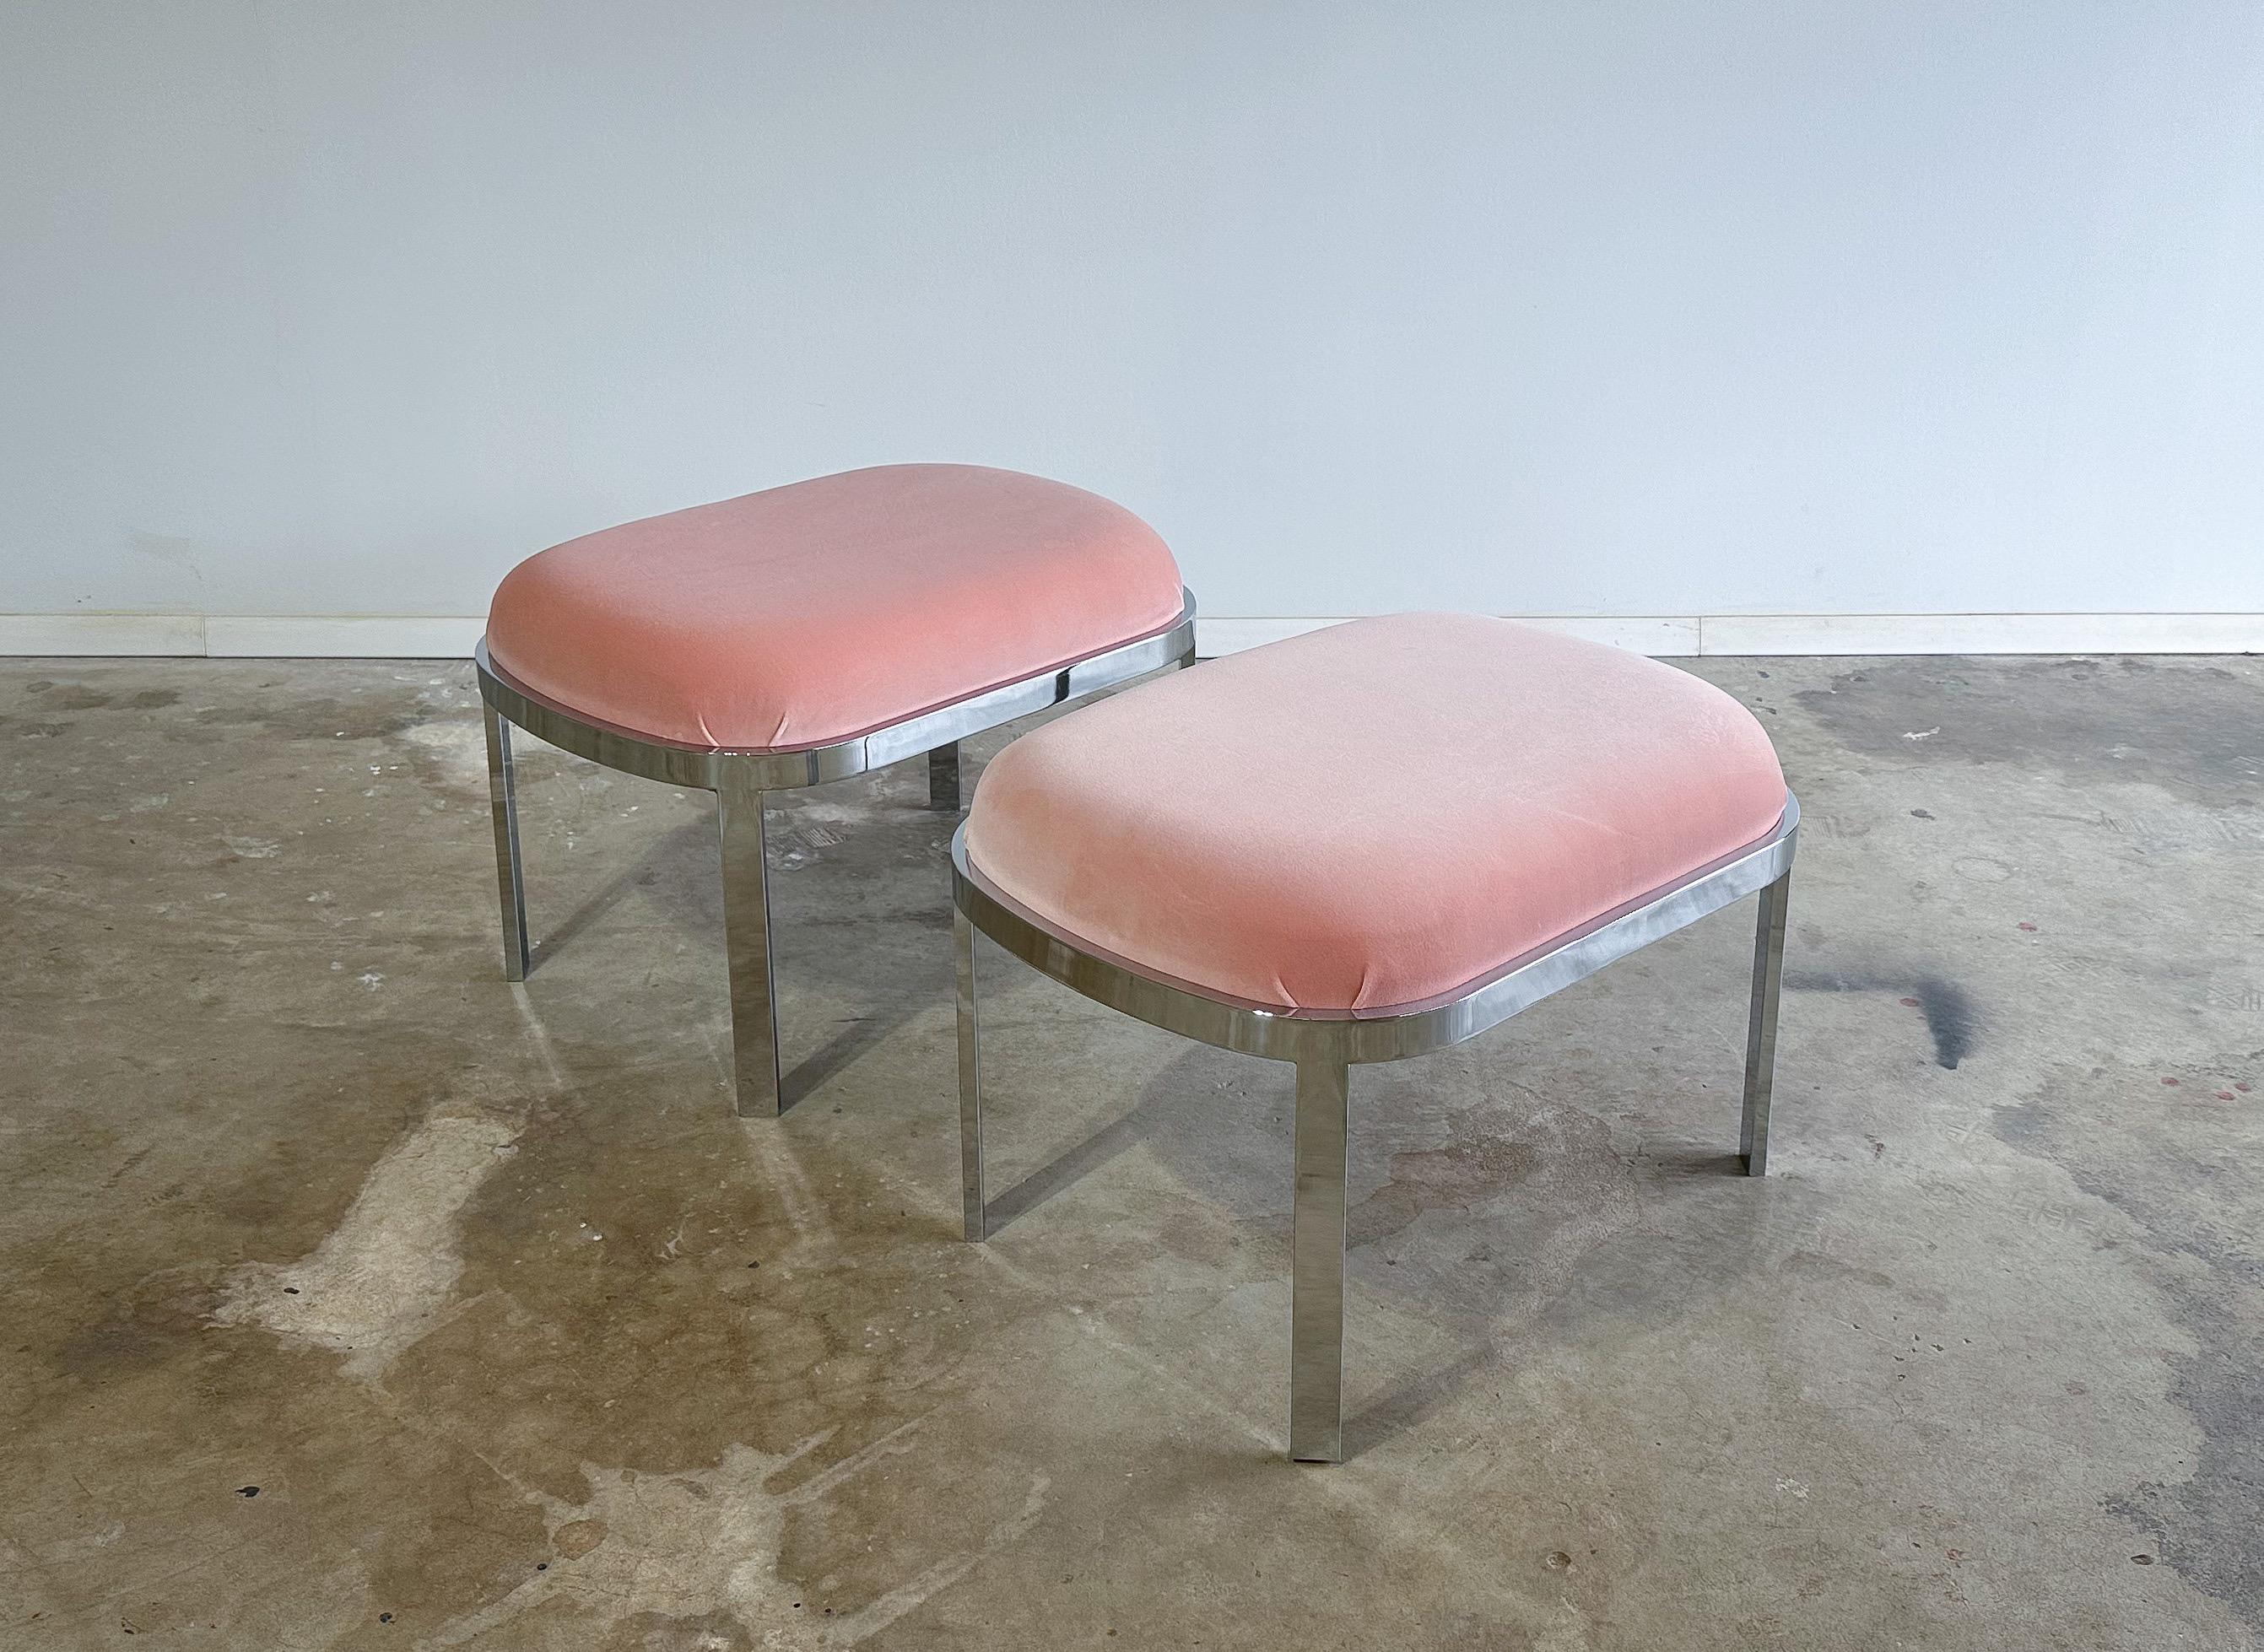 Offered is a pair of vintage chrome stools or ottomans in the style of Milo Baughman. Featuring well constructed, heavy gauge chromed steel frames, and freshly upholstered seats in a beautiful blush pink velvet. These would be perfect as functional